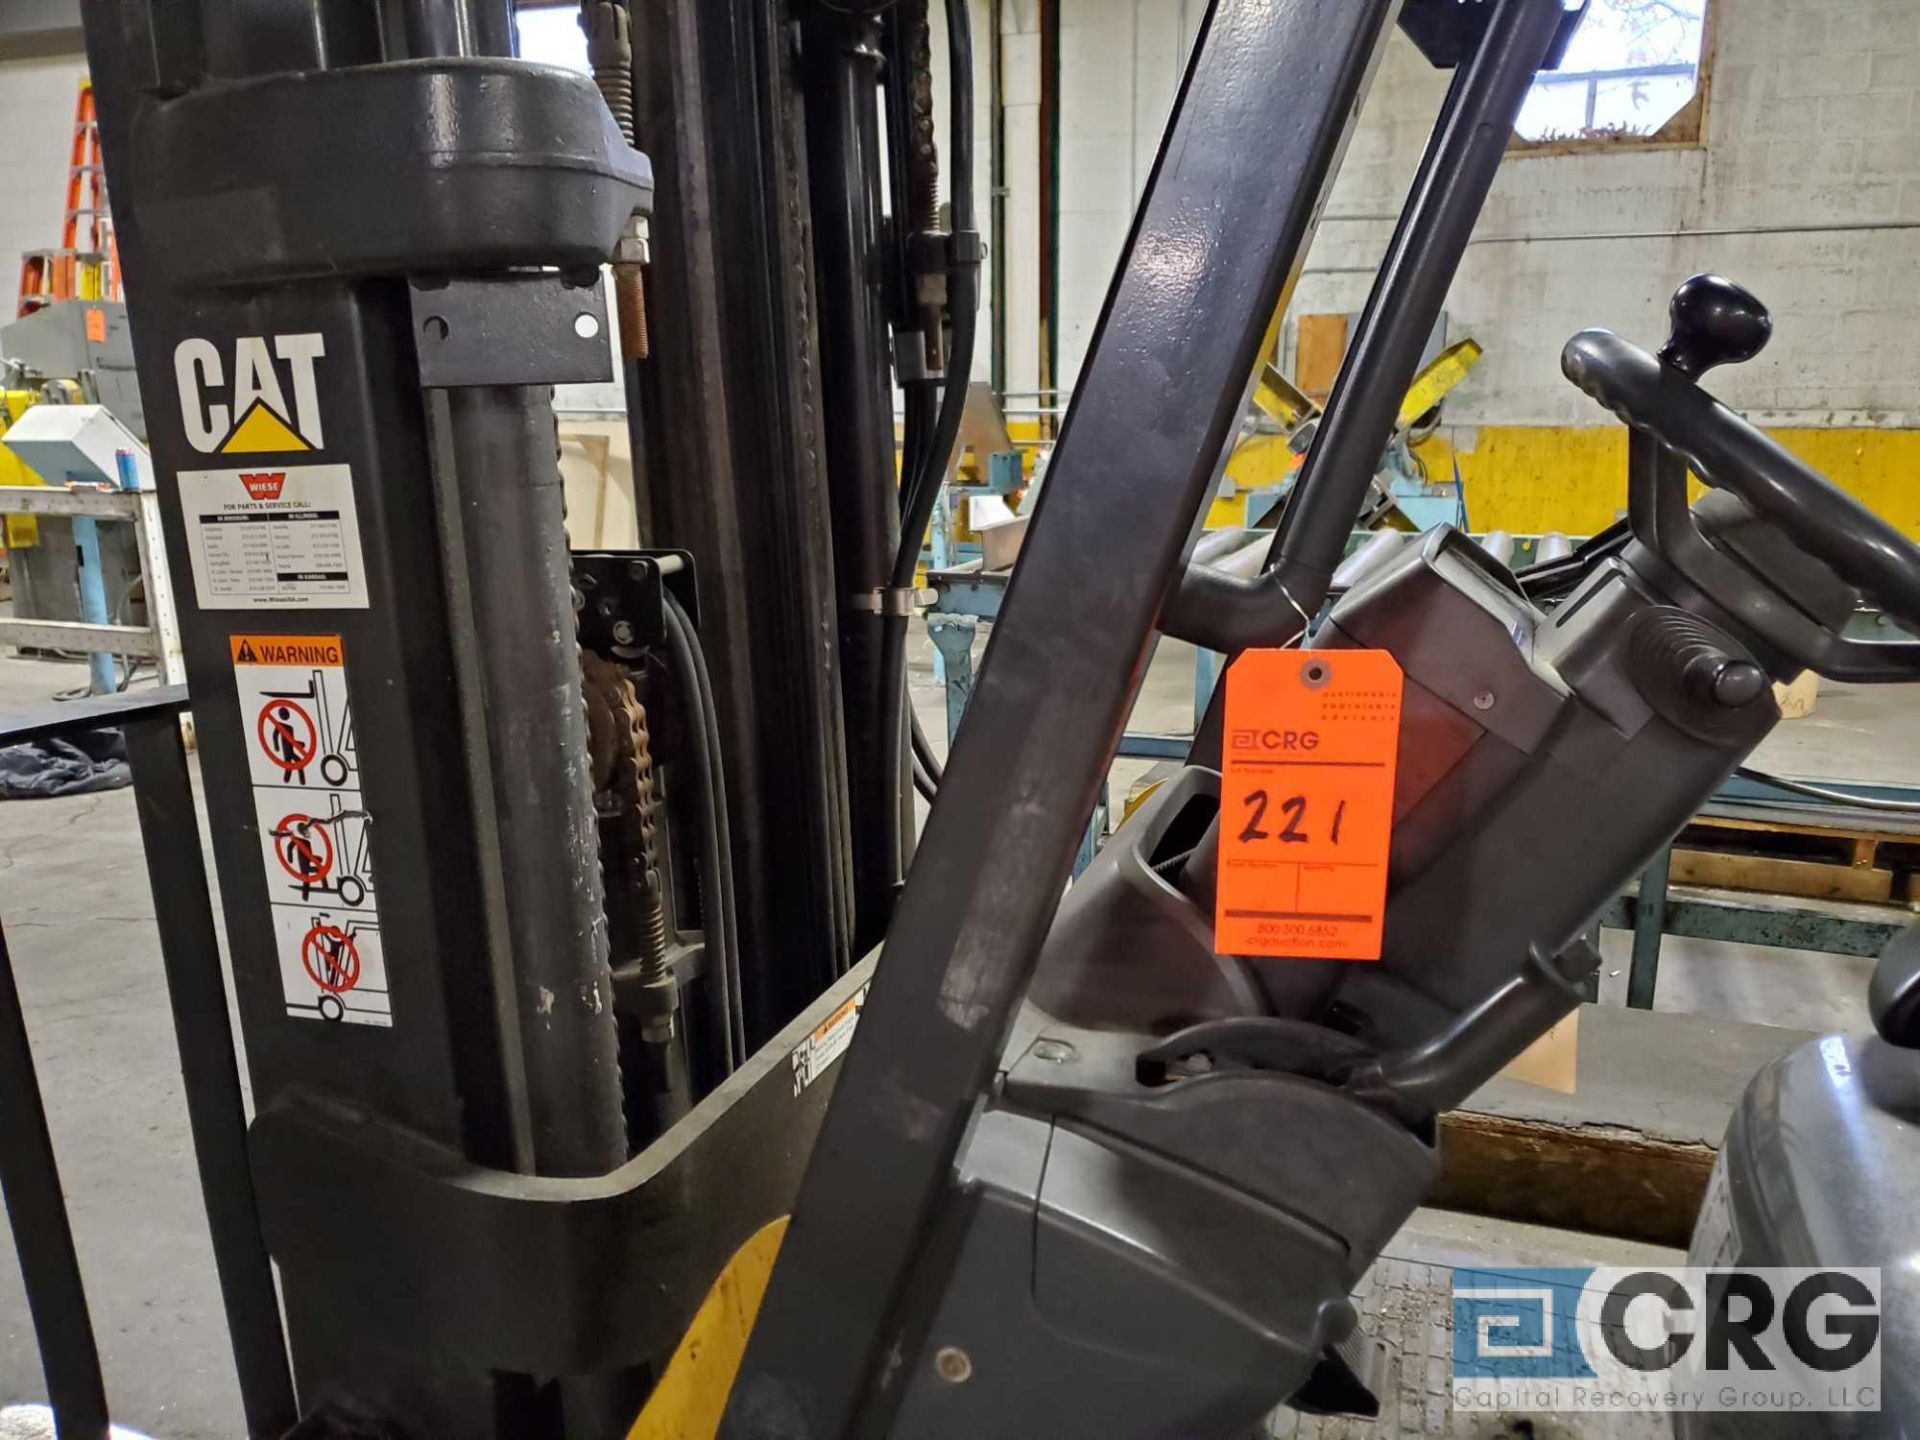 2013 Caterpillar m/n 2C5000 solid tire LP forklift - Image 2 of 6